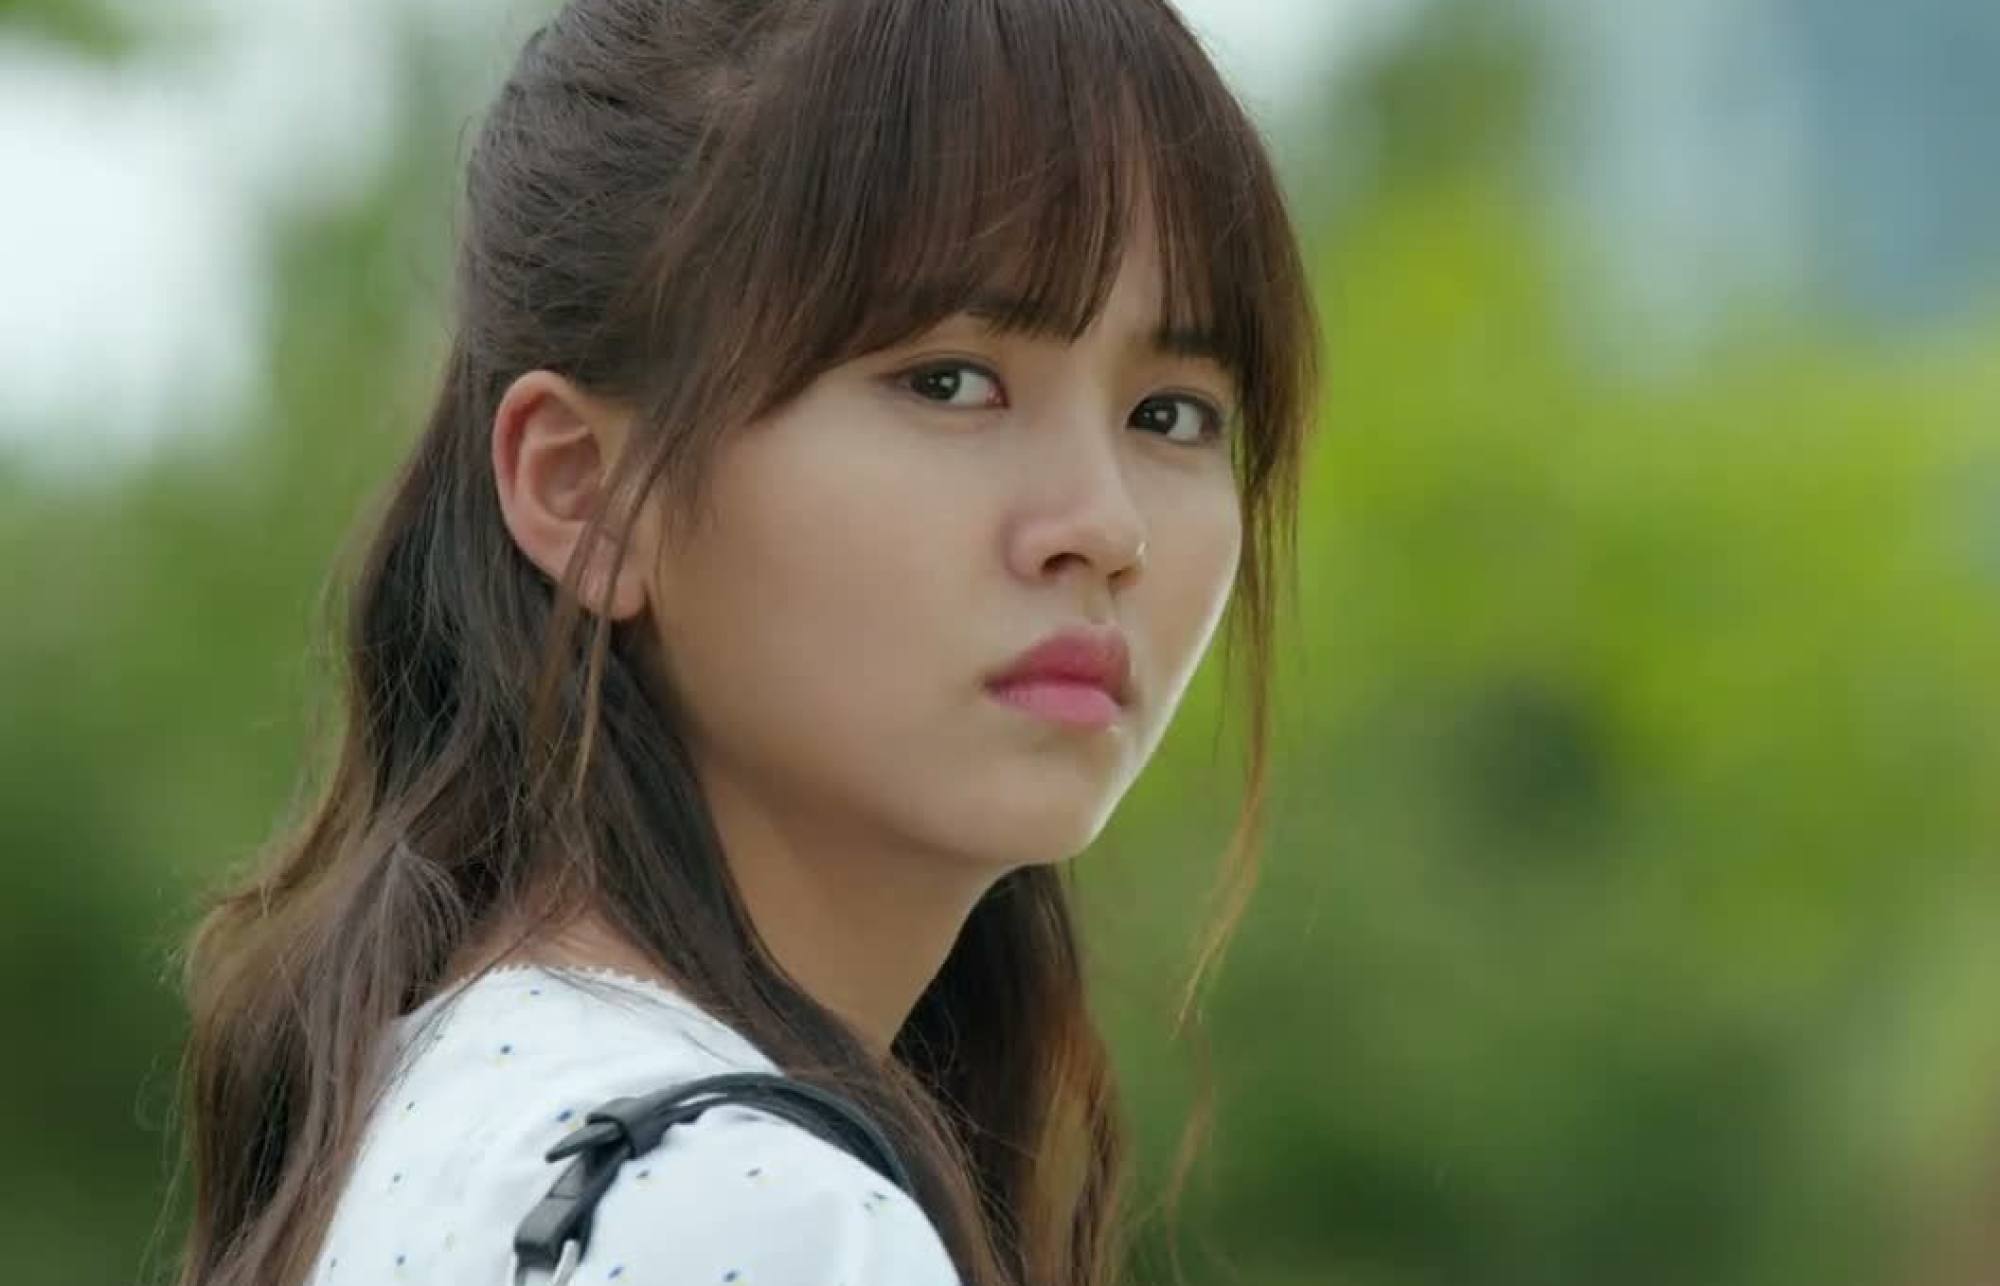 Who Is Kim So Hyun Star Of K Drama My Lovely Liar Who Has Been Charming Audiences Since Her